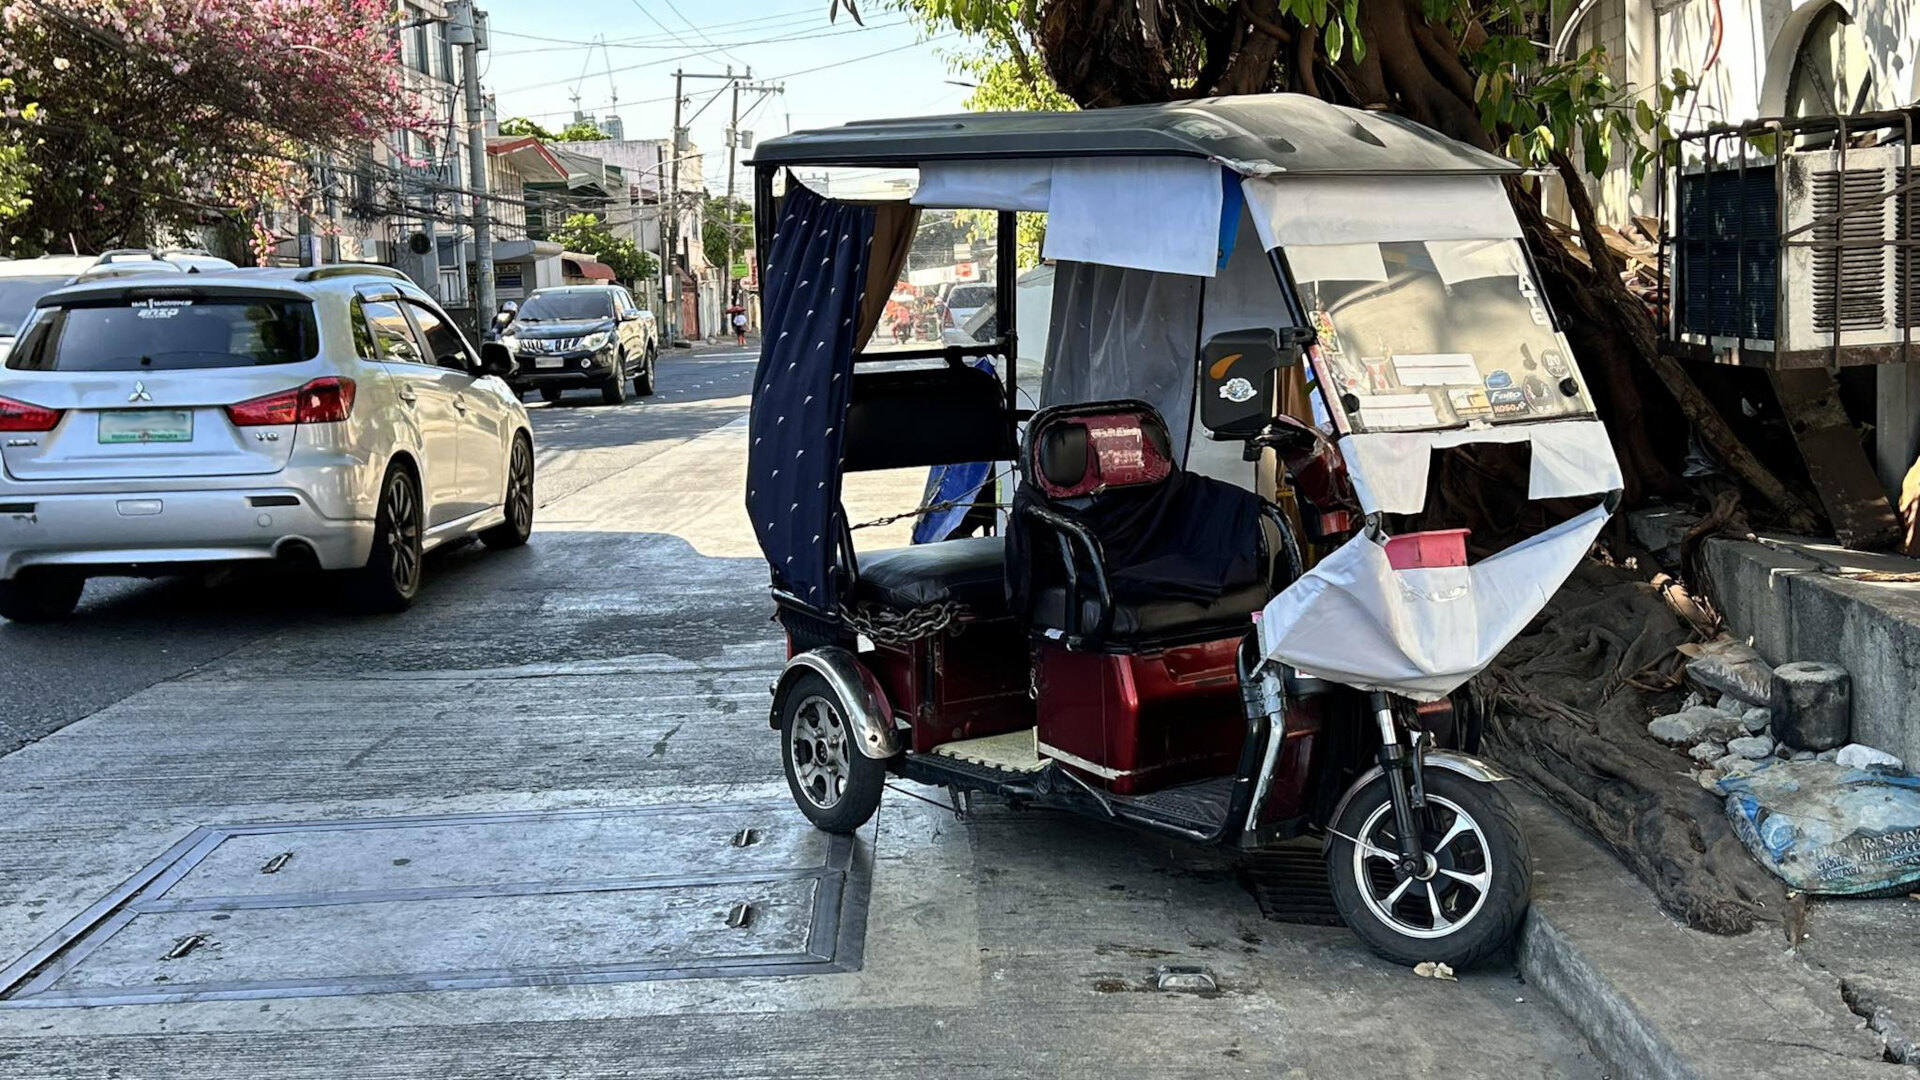 Image of an electric tricycle (e-trike) in Metro Manila, Philippines